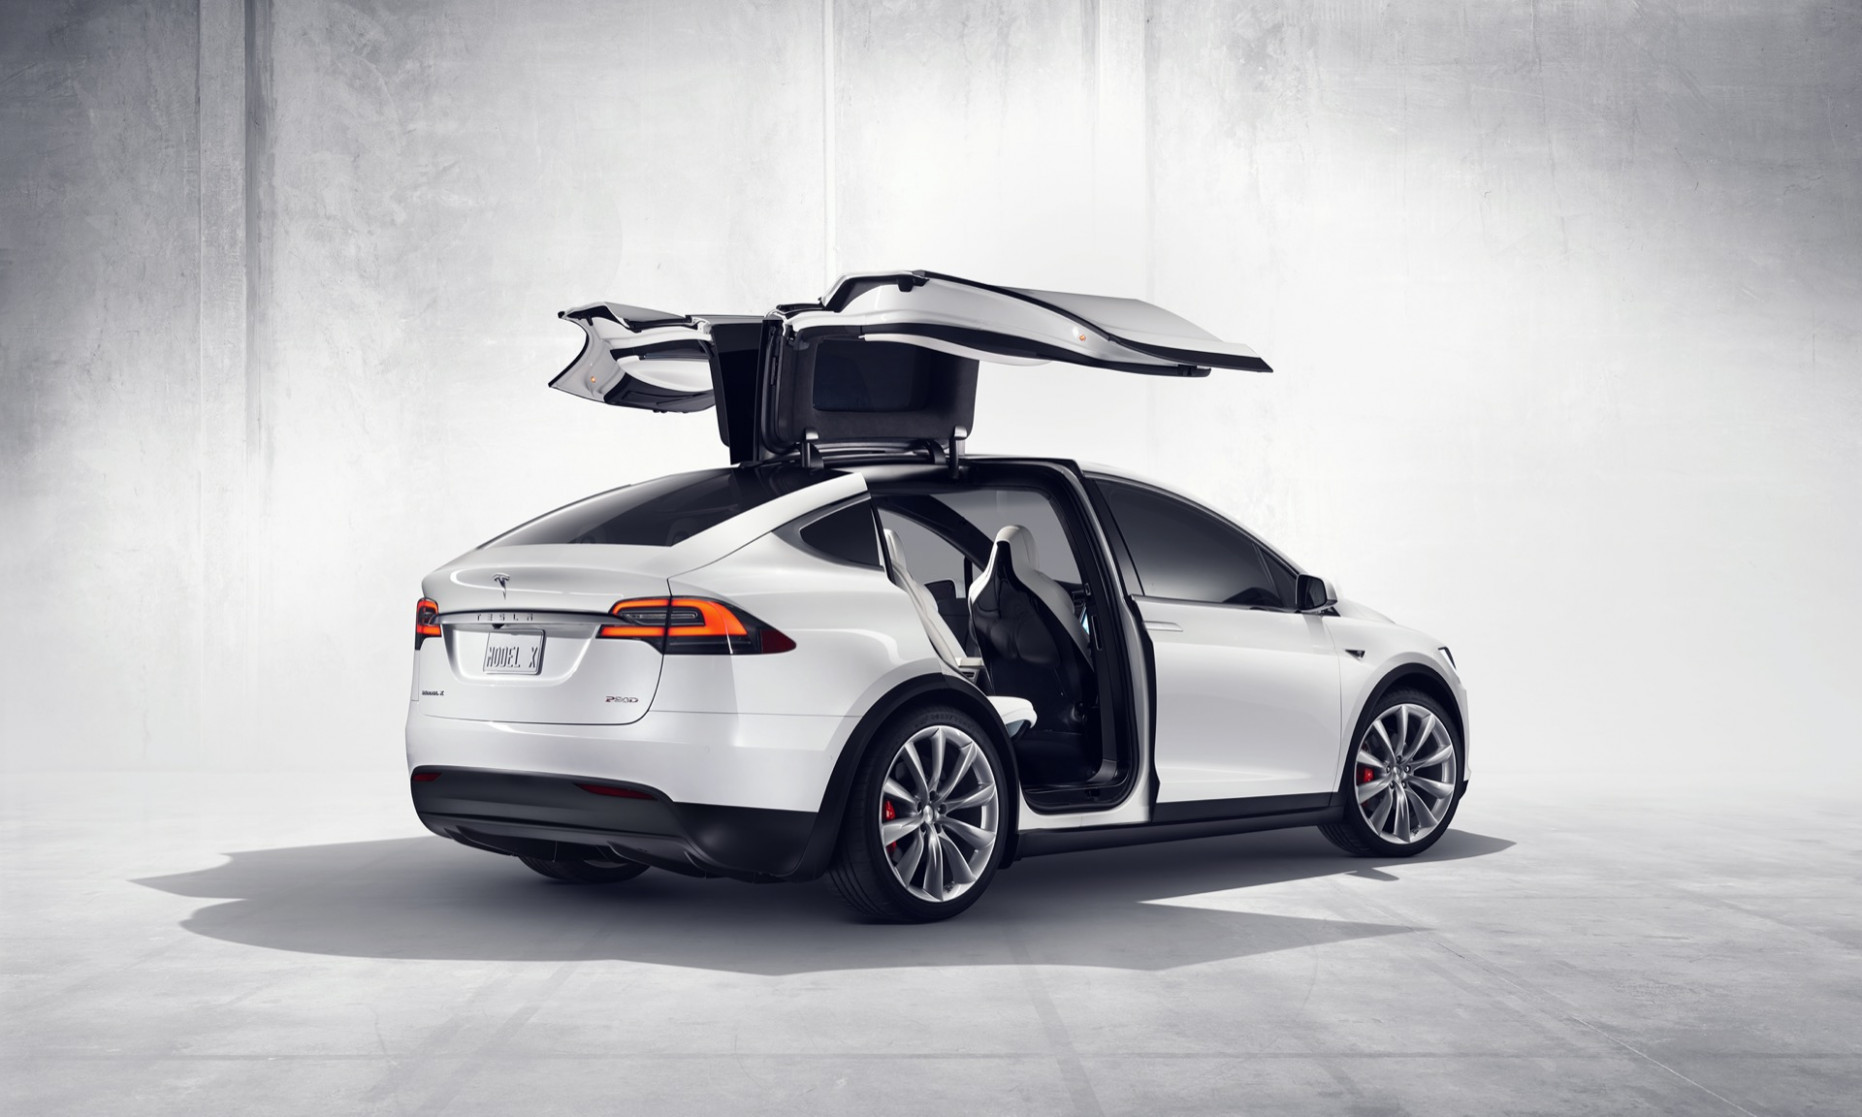 Price and Release date price of tesla model x